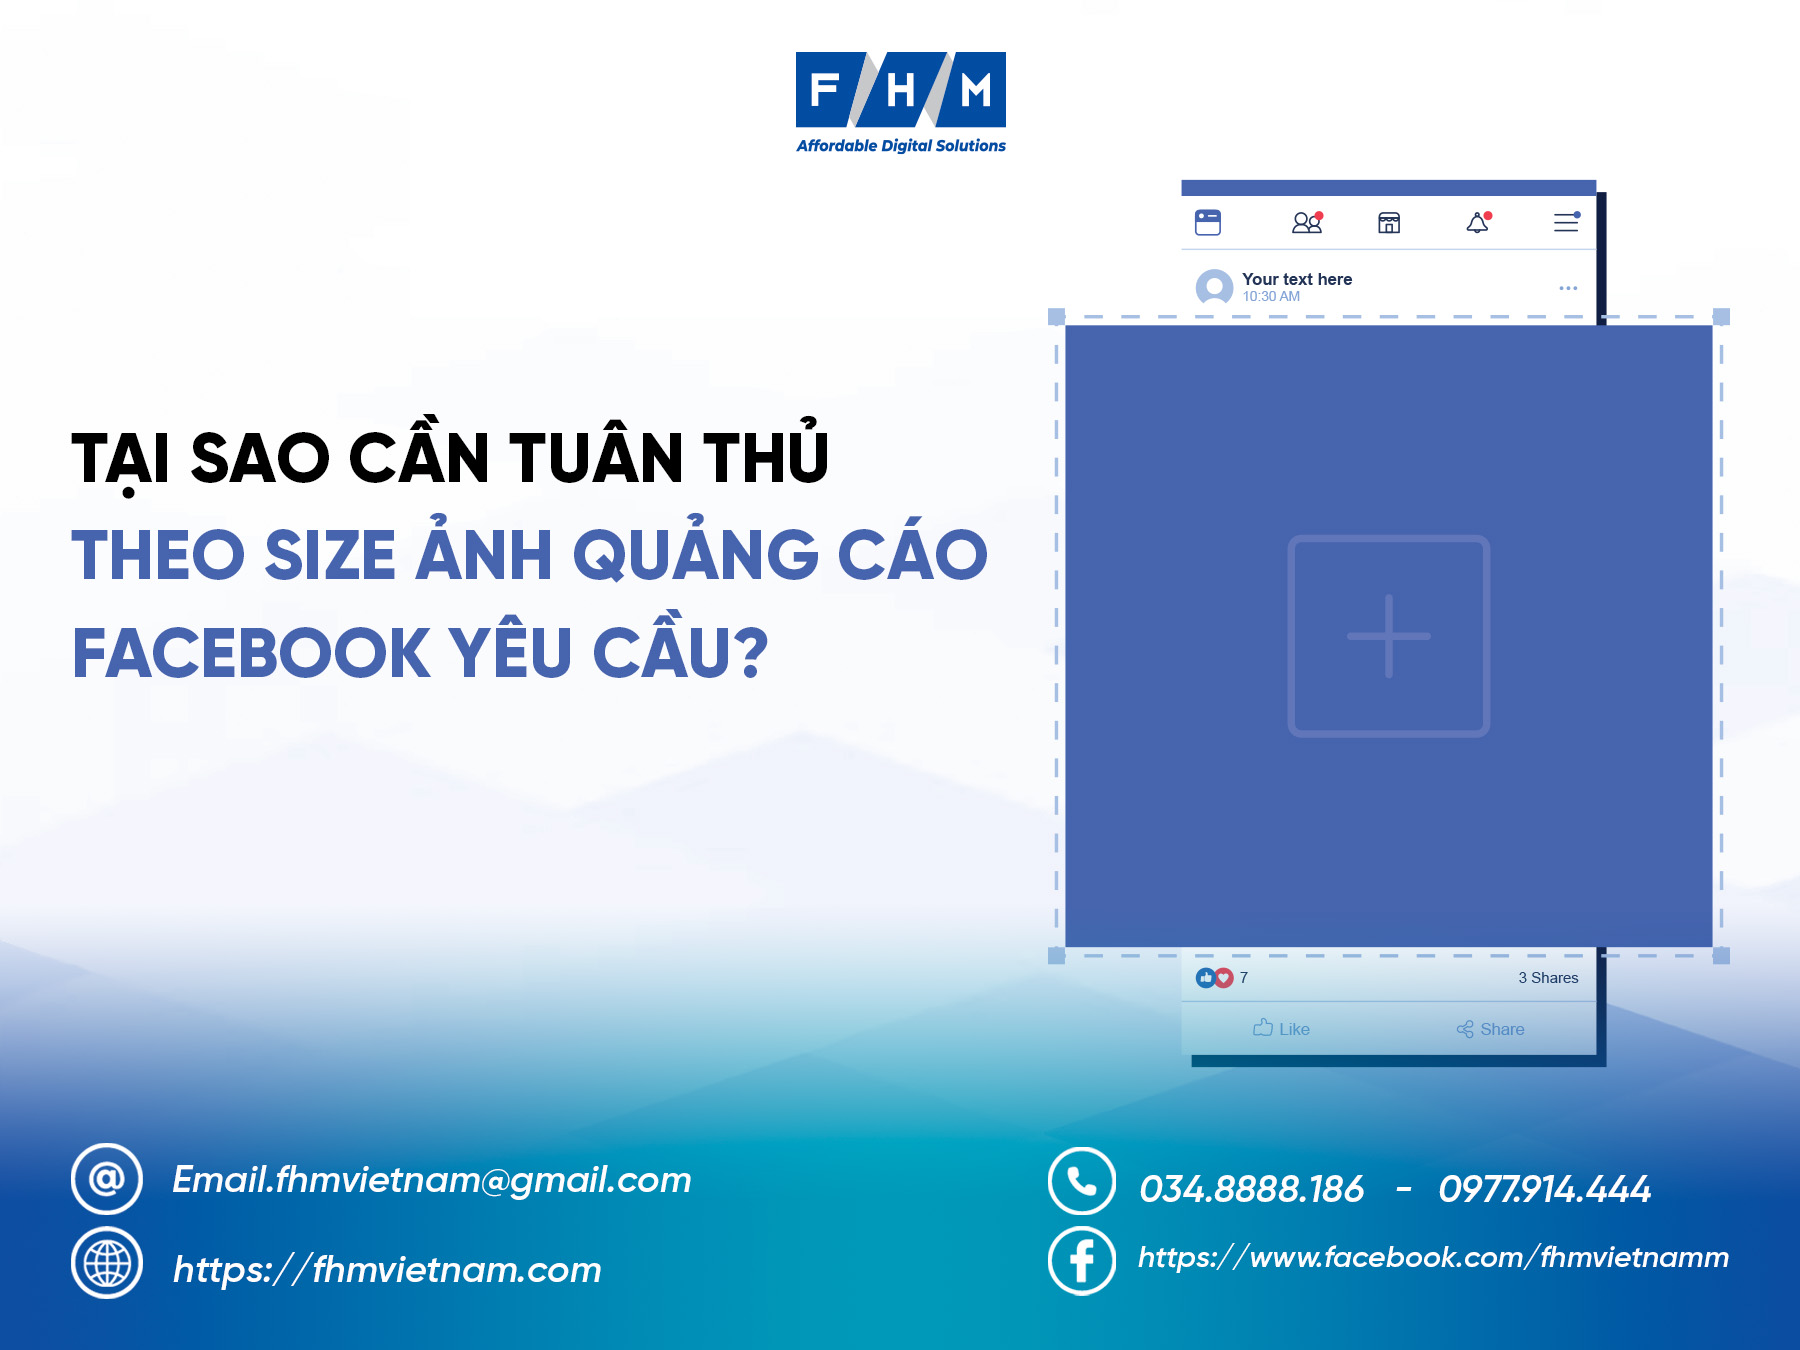 kich-thuoc-anh-quang-cao-facebook-1